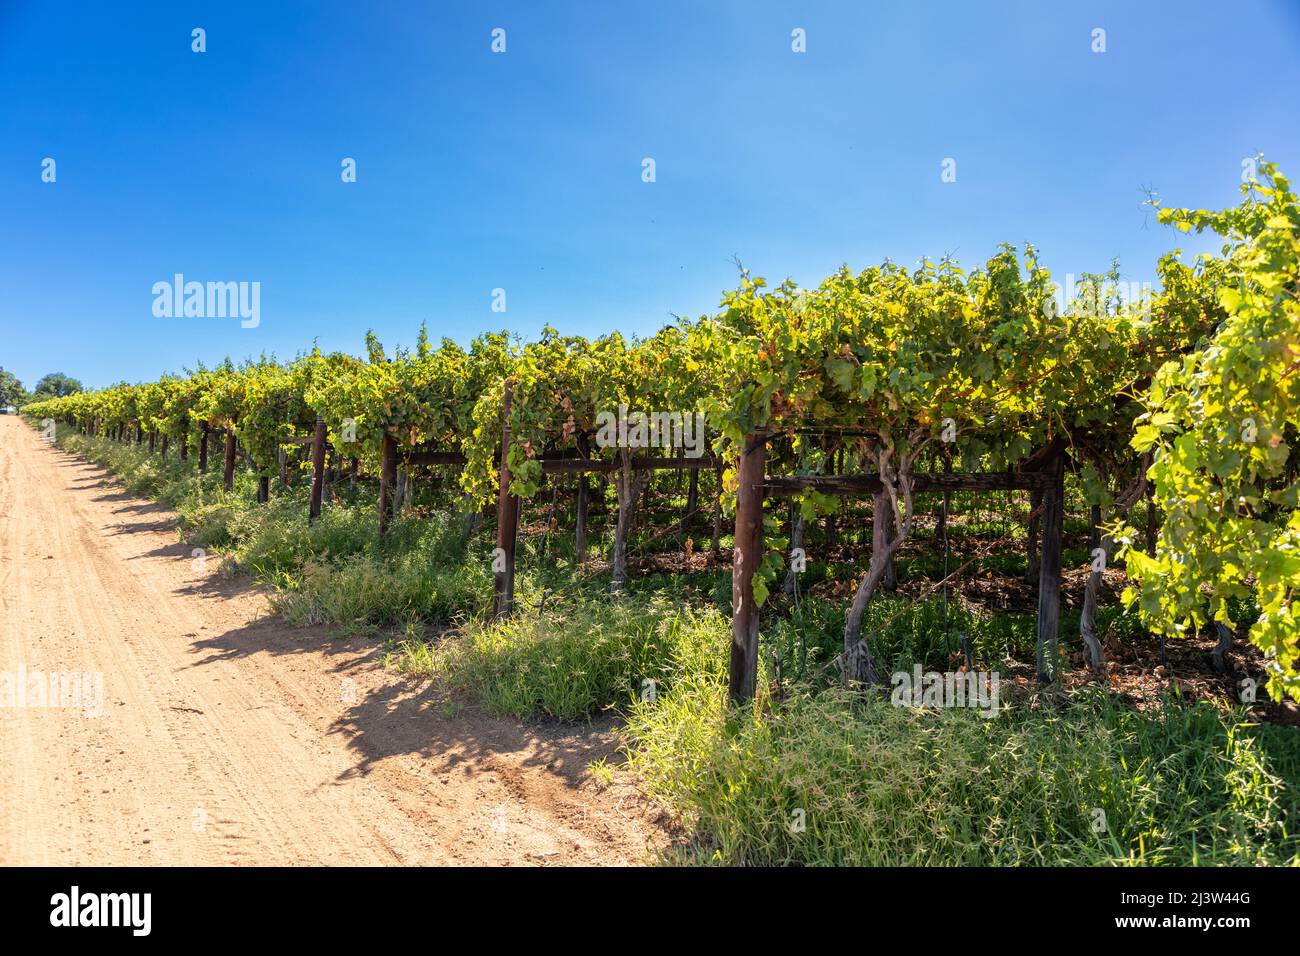 Rows of vines in a vineyard. On the lefthand side is a gravel road leading into the distance, Stock Photo